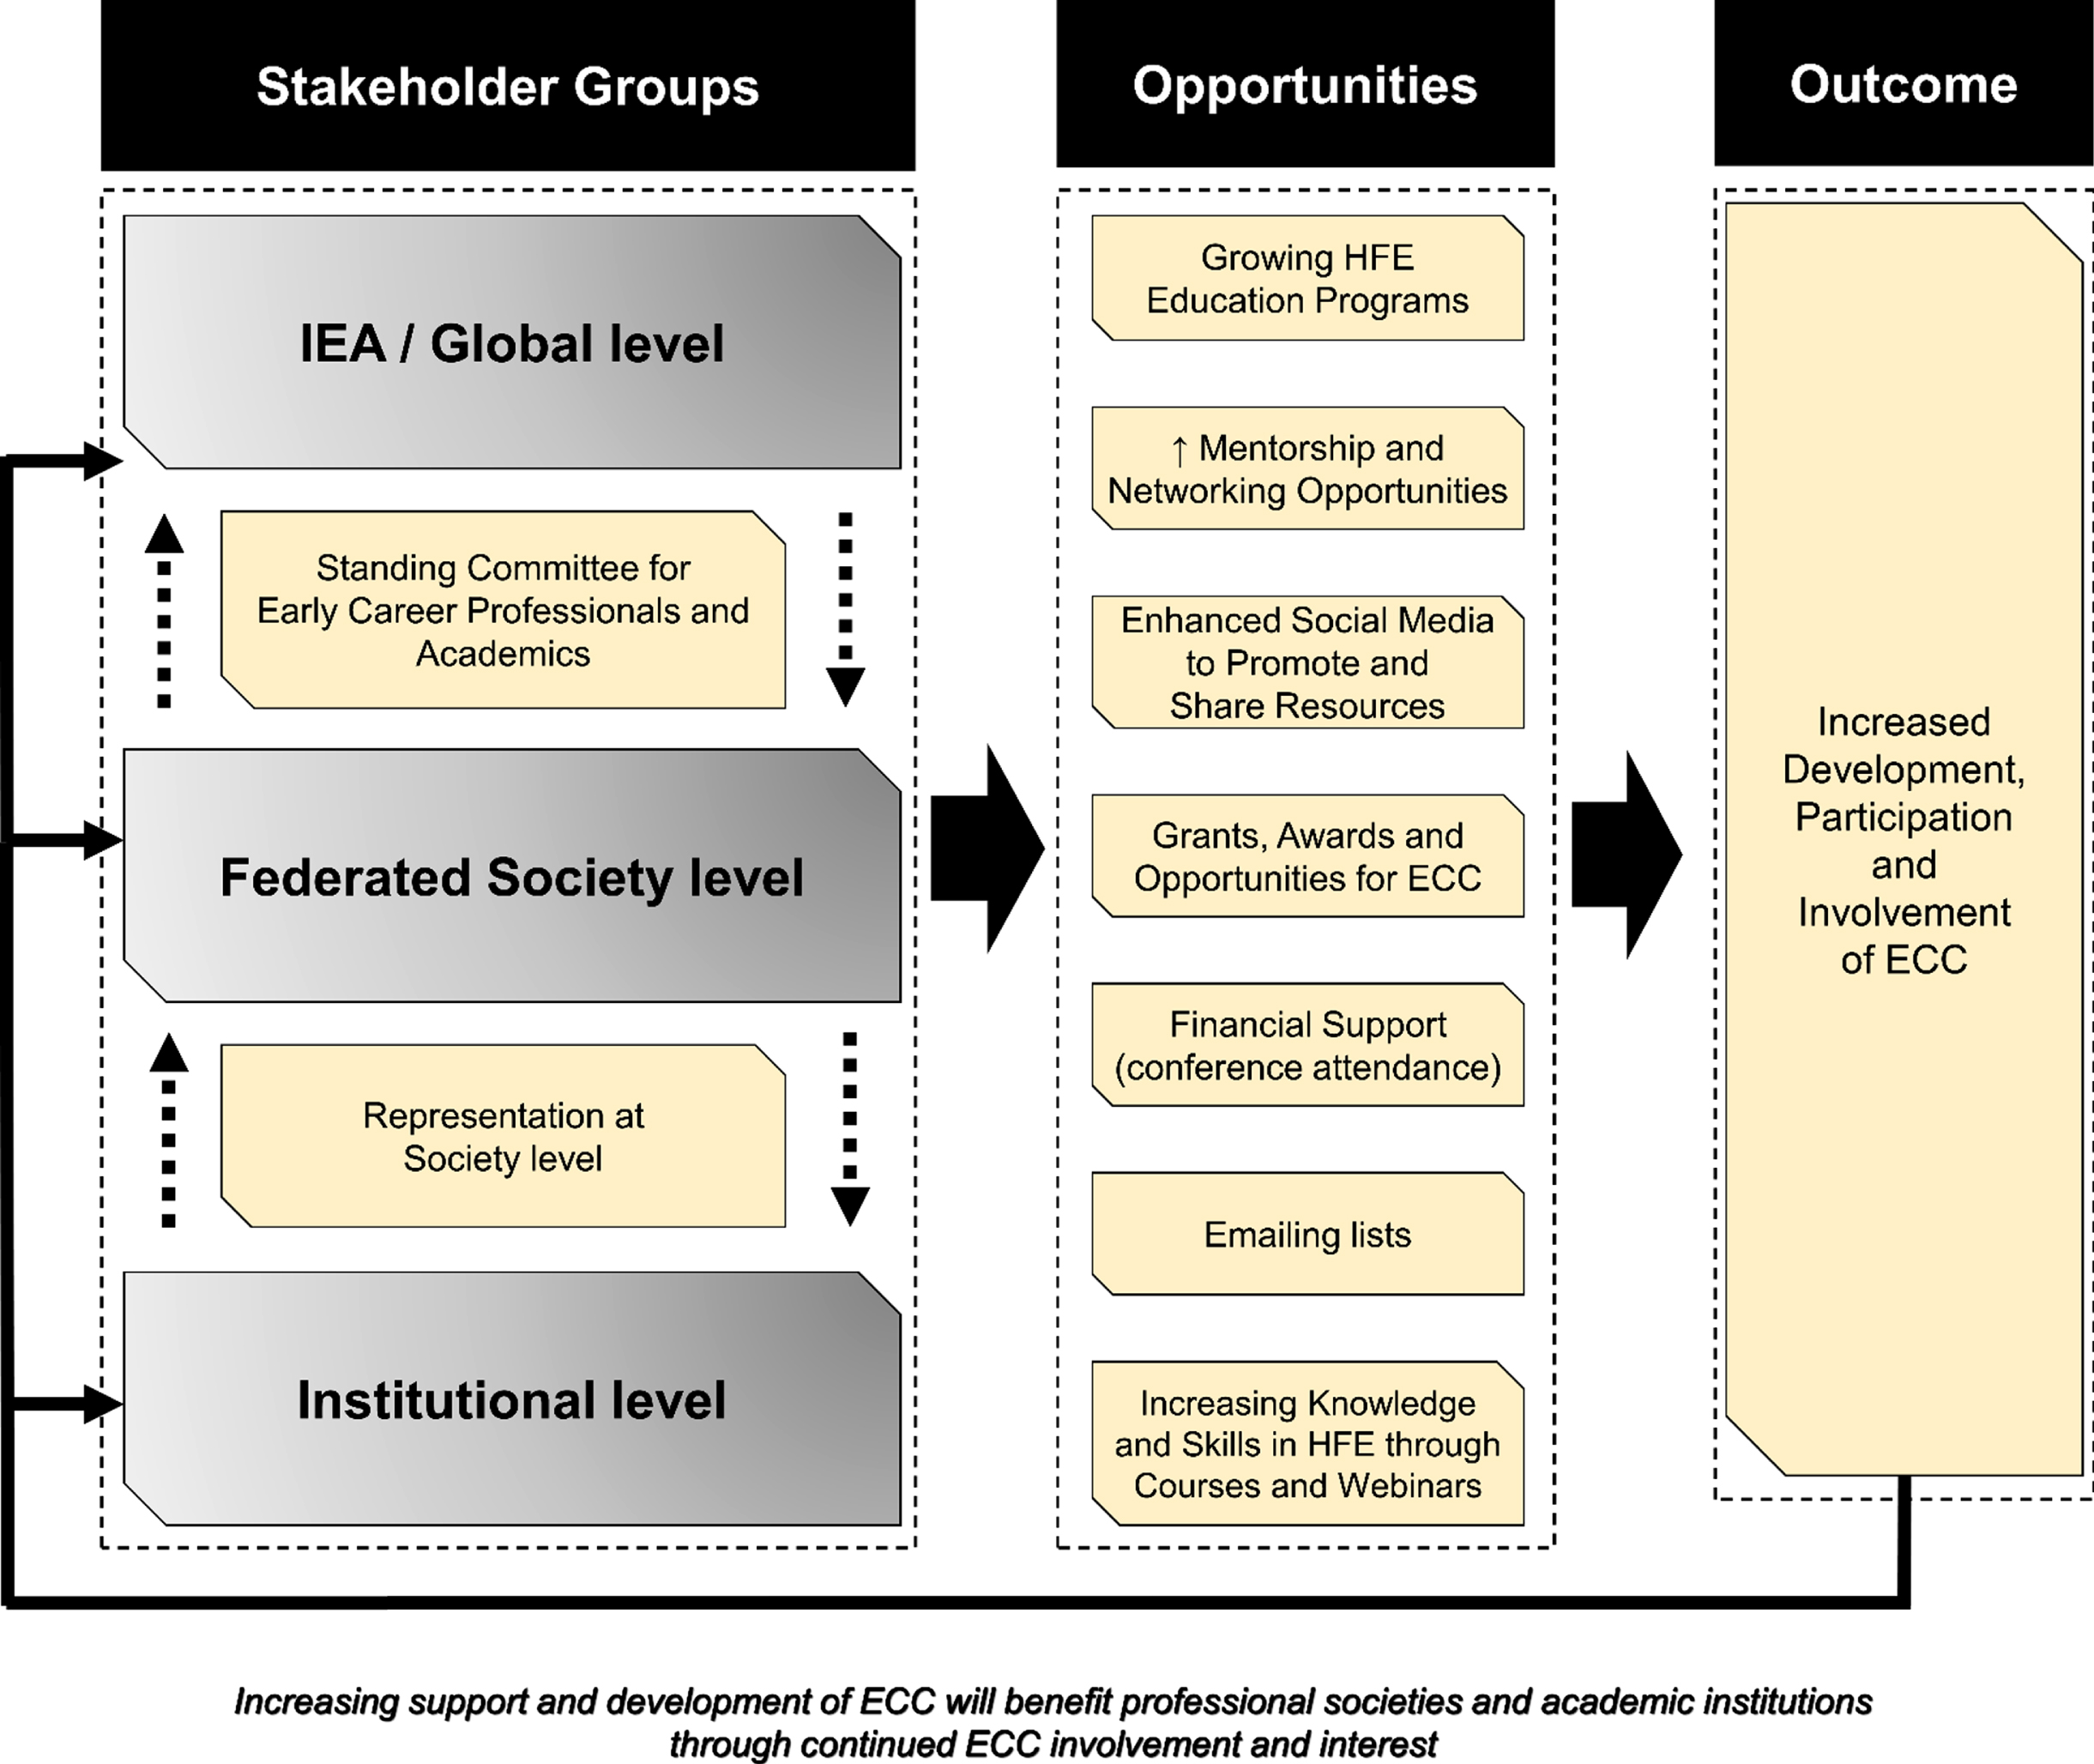 A framework of proposed opportunities aimed at developing and supporting the ECC to ensure continued development and involvement of the ECC at IEA, Federated Society levels and institutional level. Through representation by ECC members at IEA and Federated Society levels, accompanied by interactions across all levels (denoted by the dash arrows) appropriate opportunities specific or relevant to the context can be leveraged and developed into programs aimed at supporting ECC from a global, local and institutional level.